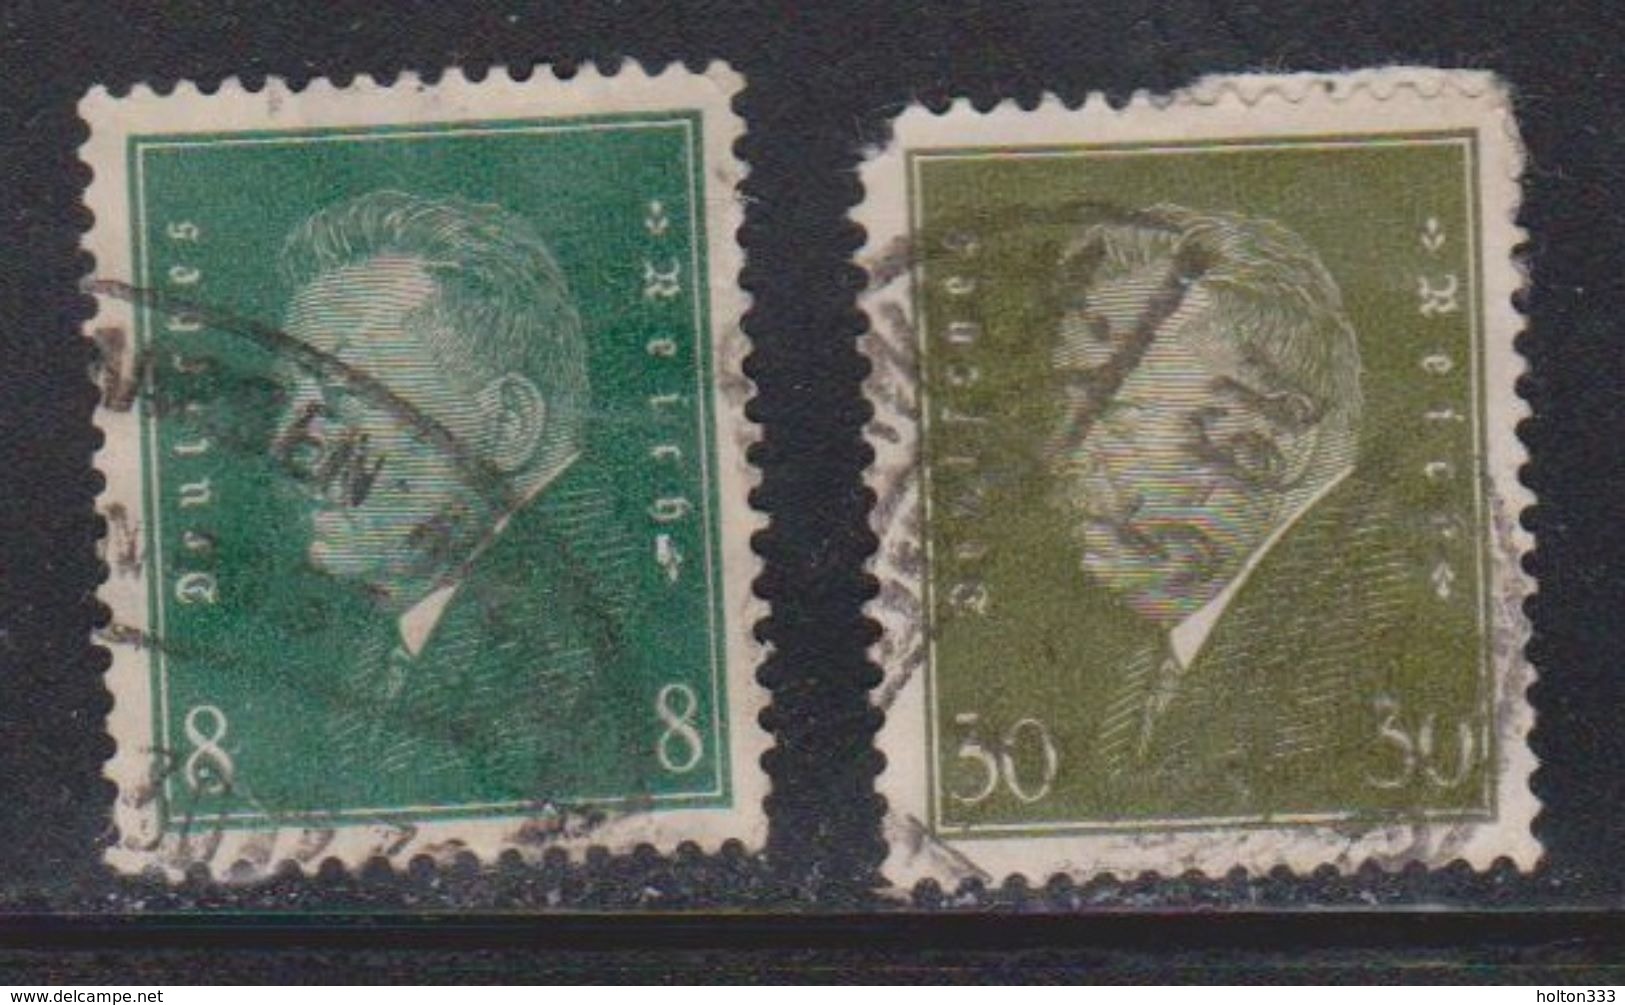 GERMANY Scott # 370, 378 Used - Used Stamps